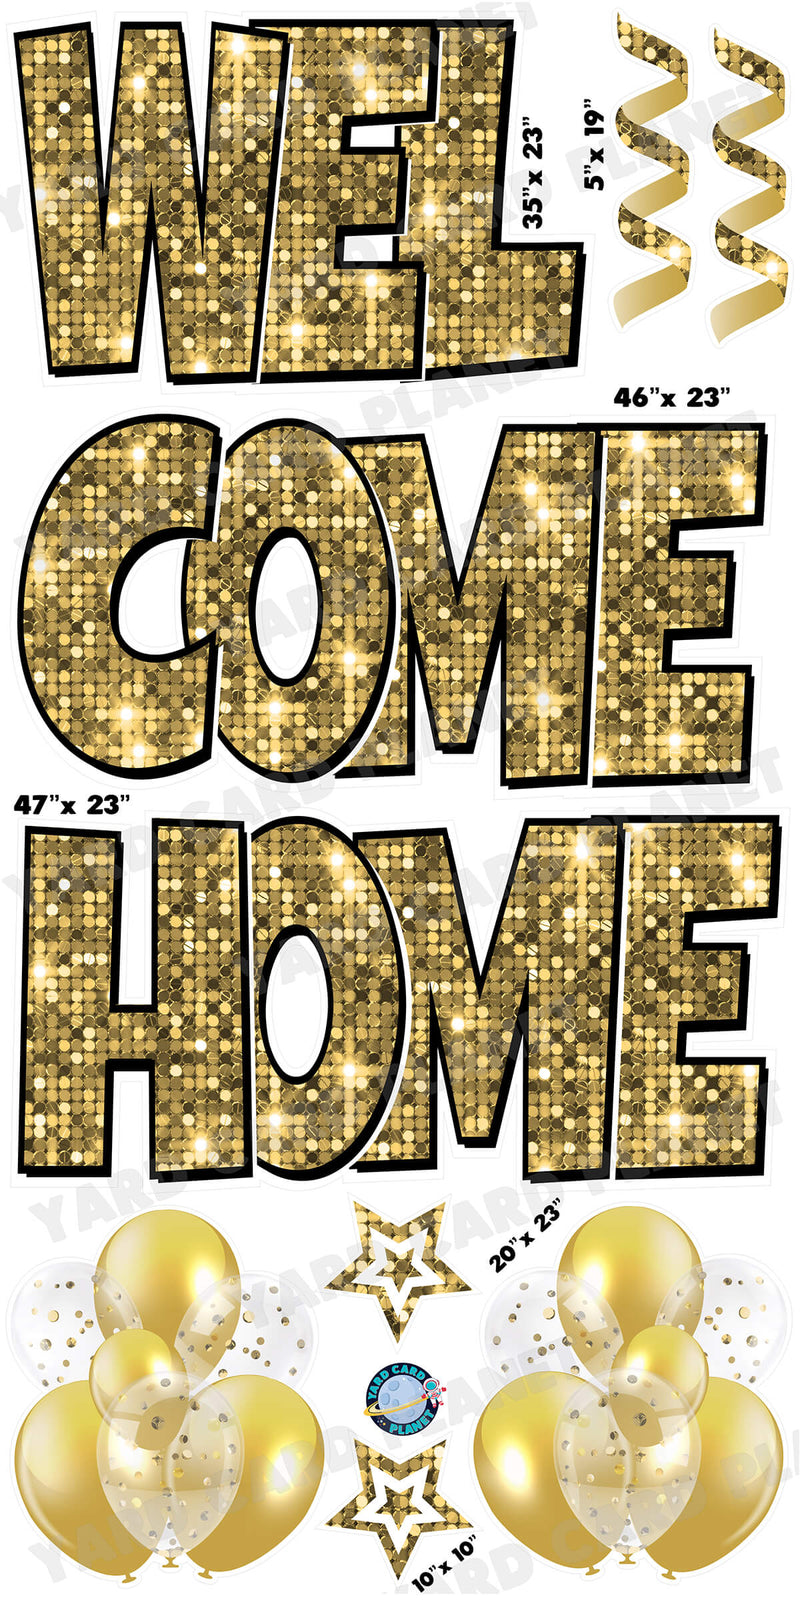 Large 23" Welcome Home Yard Card EZ Quick Sets in Luckiest Guy Font and Flair in Gold Sequin Pattern